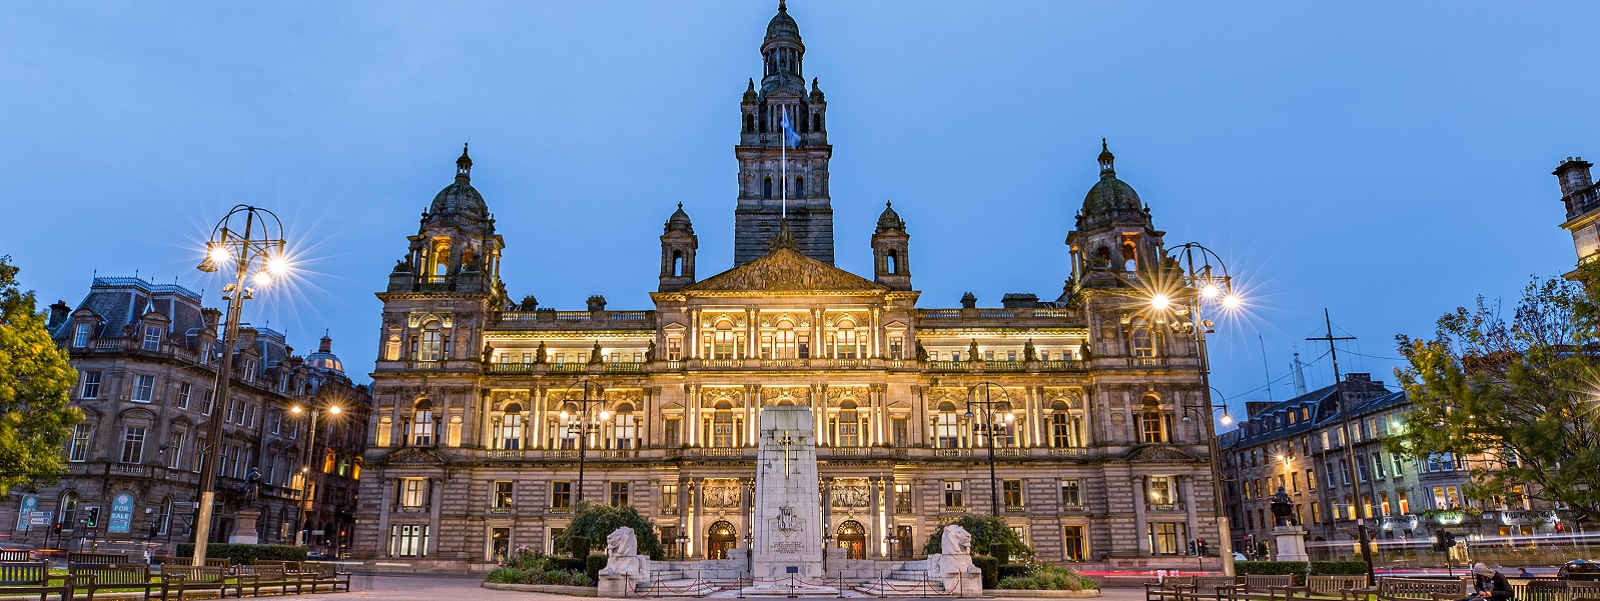 Glasgow's George Square at night